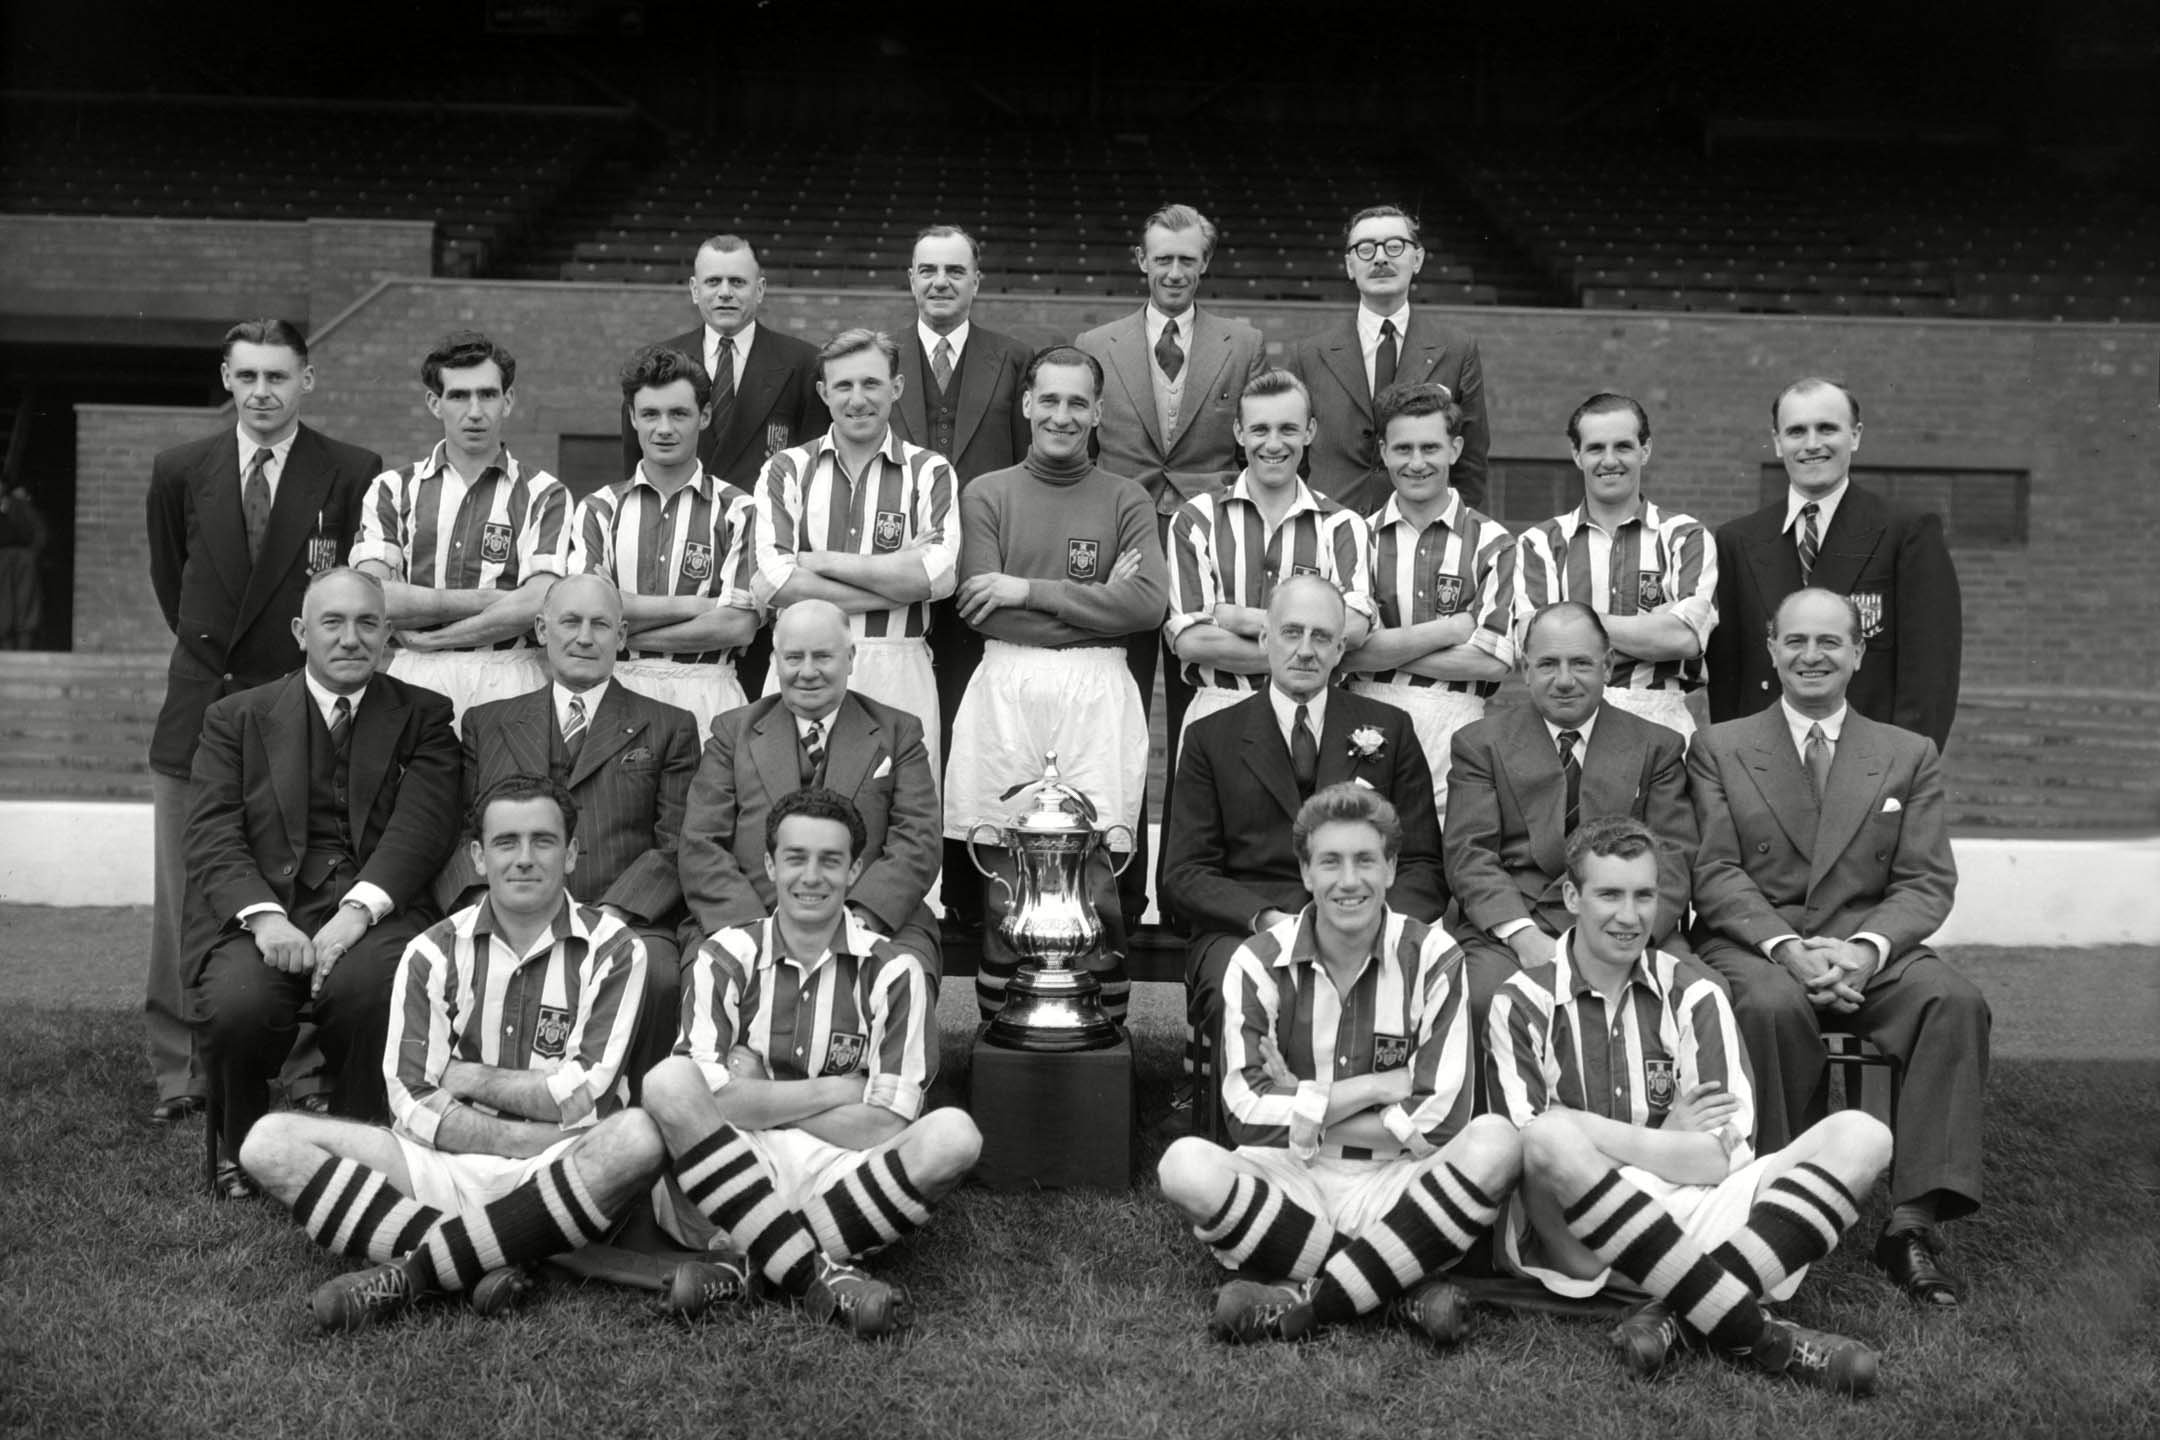 A team photo of West Bromwich Albion's 1954 FA Cup winners